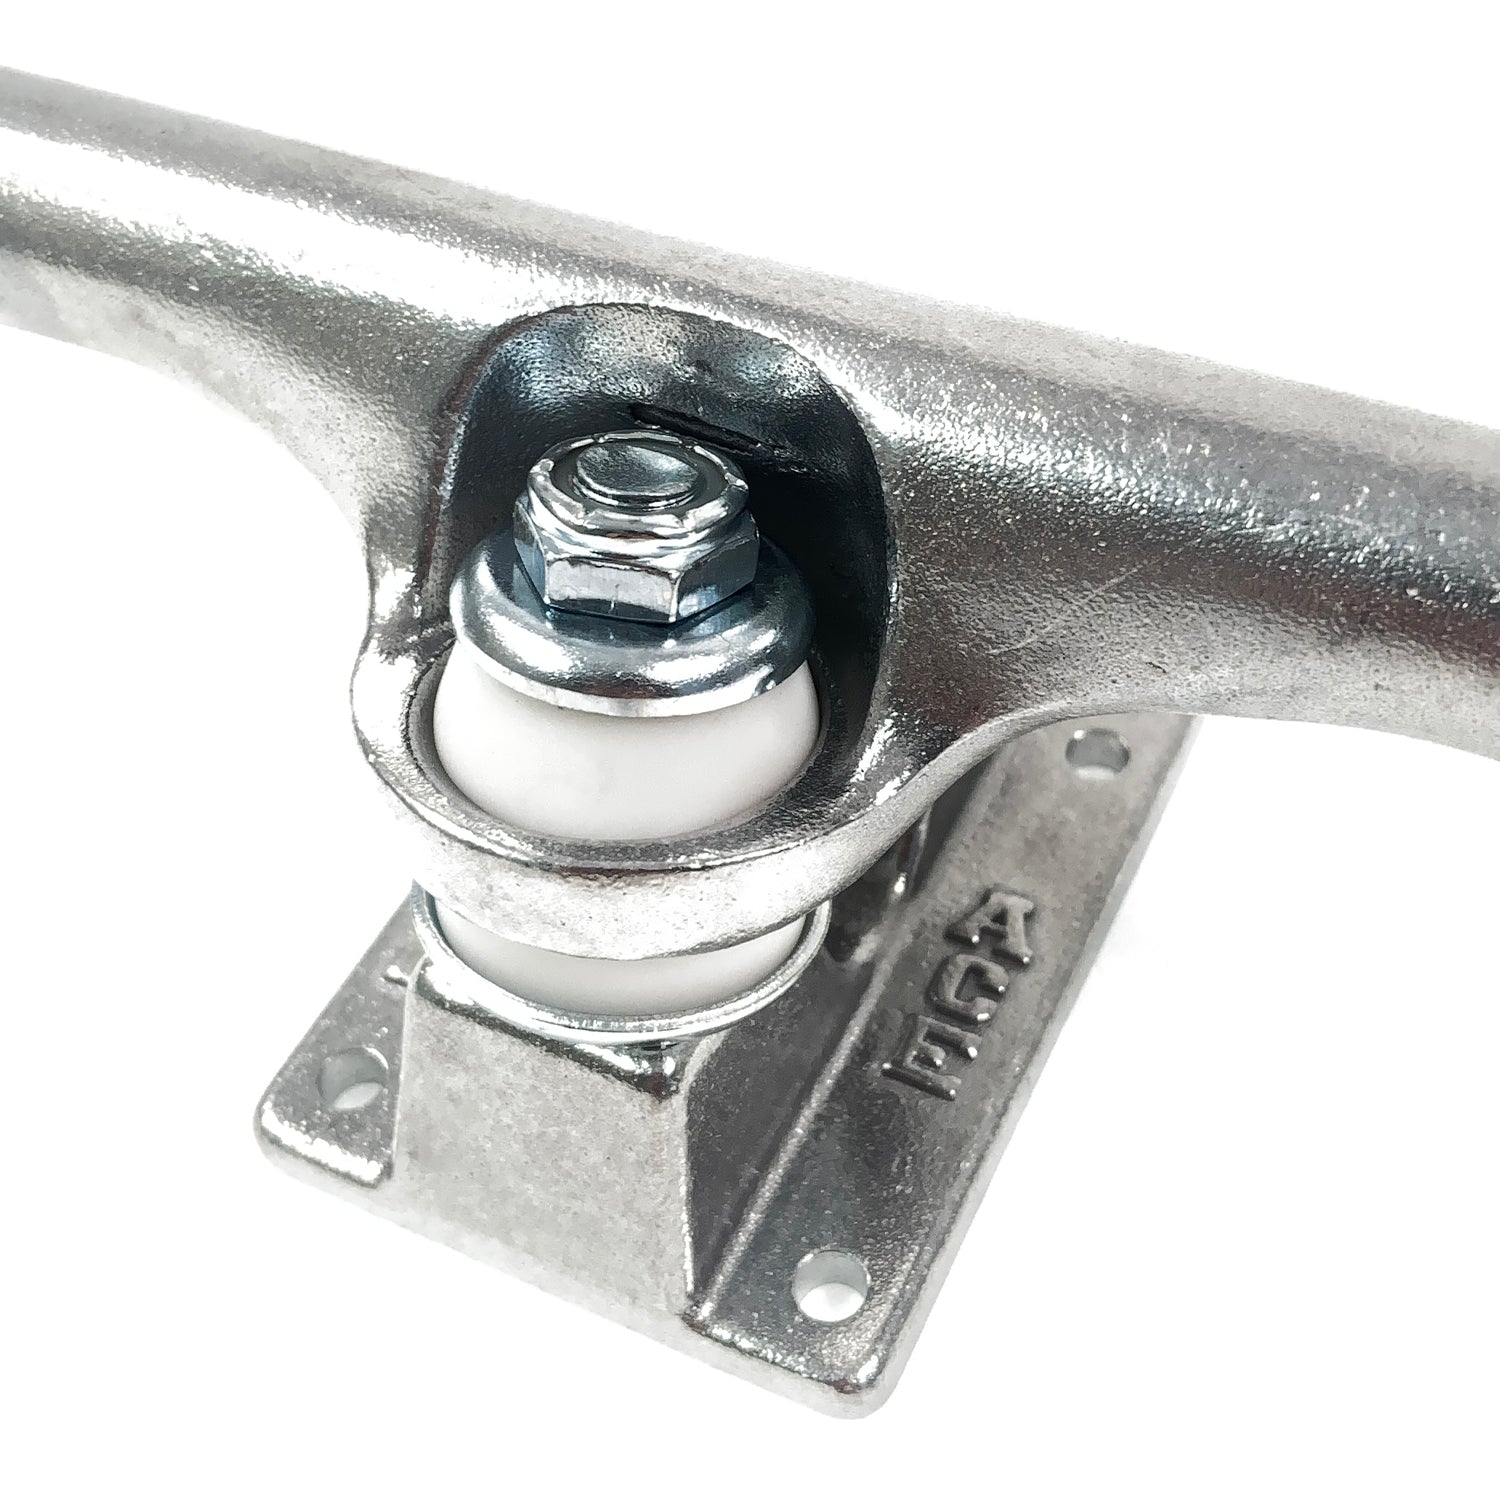 Ace Trucks Classic 44 (8.25") Truck - Polished Silver (Sold As Pair) - Prime Delux Store